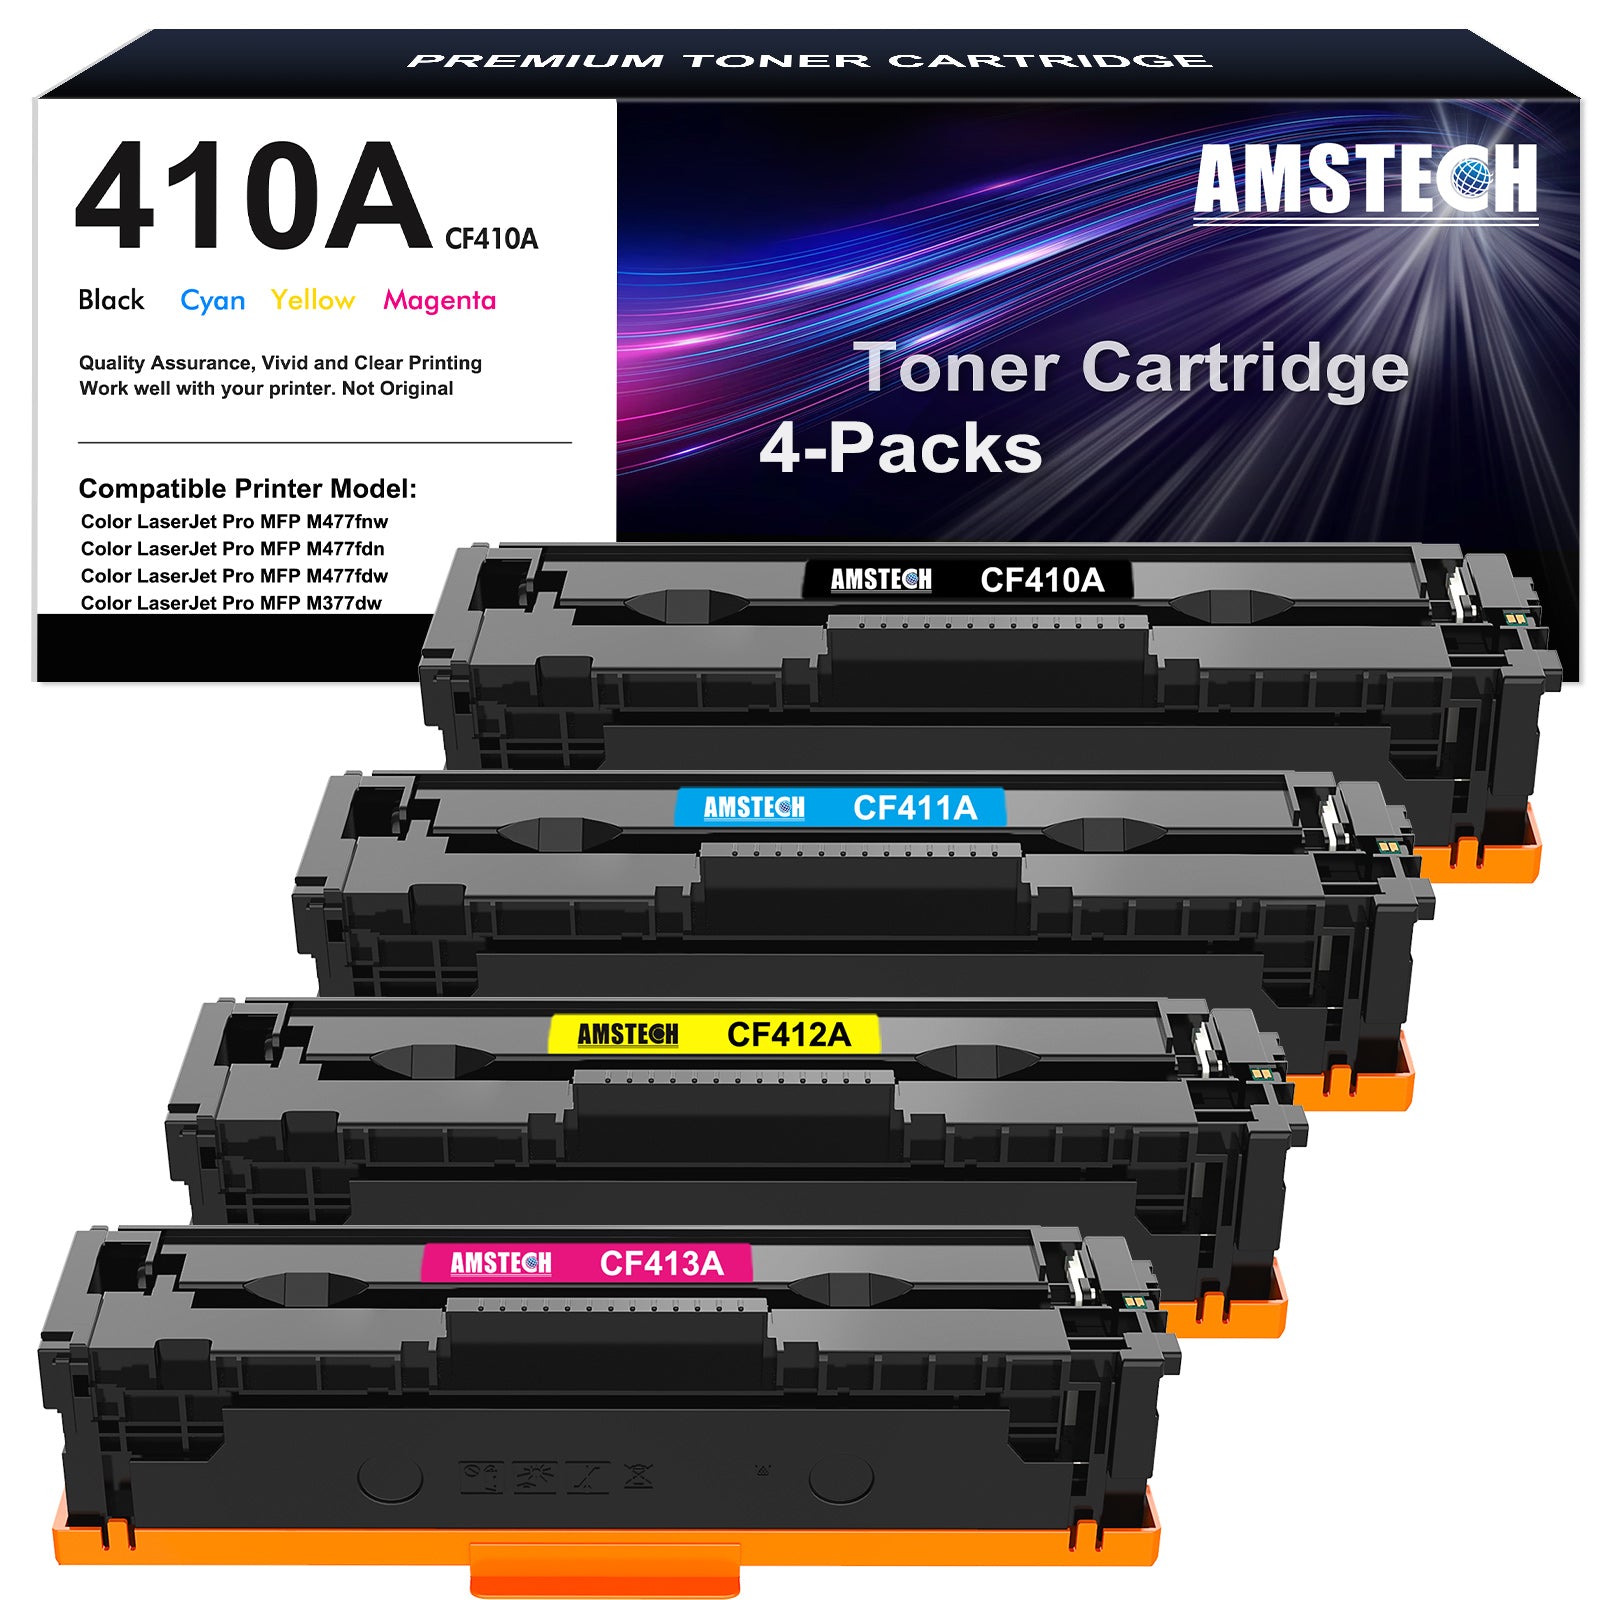 410A Toner Cartridge Compatible for HP 410A 410X CF410A CF410X Color Laserjet Pro MFP M477fnw M477fdw M477fdn M452dn M452nw M477 M452 M377 Printer Ink (Black Cyan Yellow Magenta, 4-Pack)